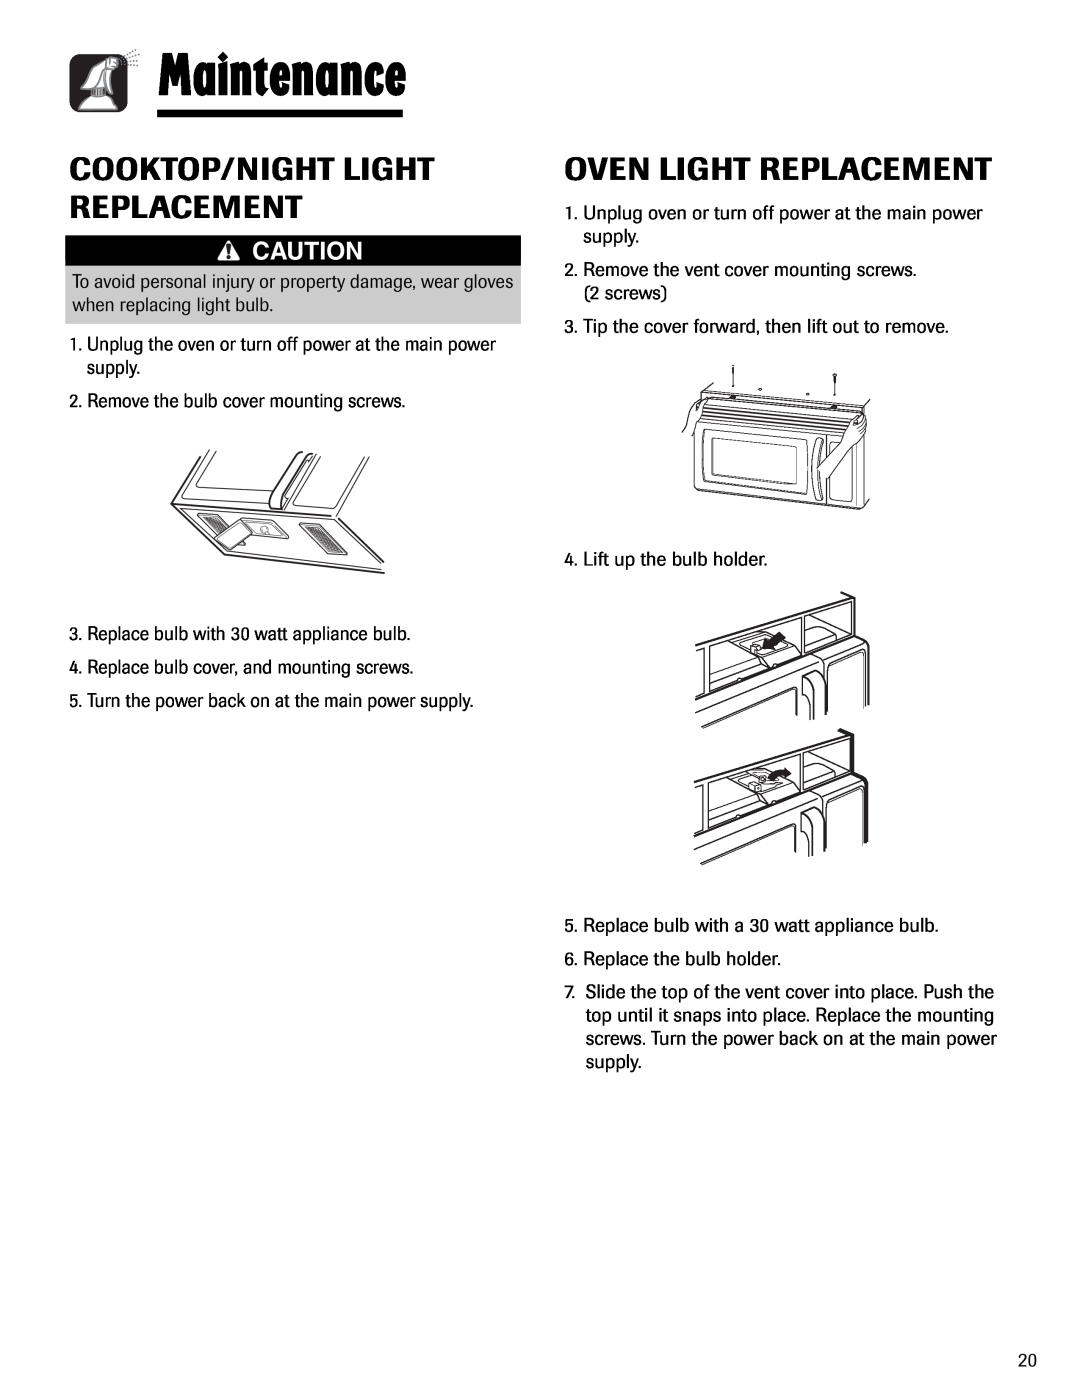 Maytag UMV1152BA important safety instructions Cooktop/Night Light Replacement, Oven Light Replacement, Maintenance 